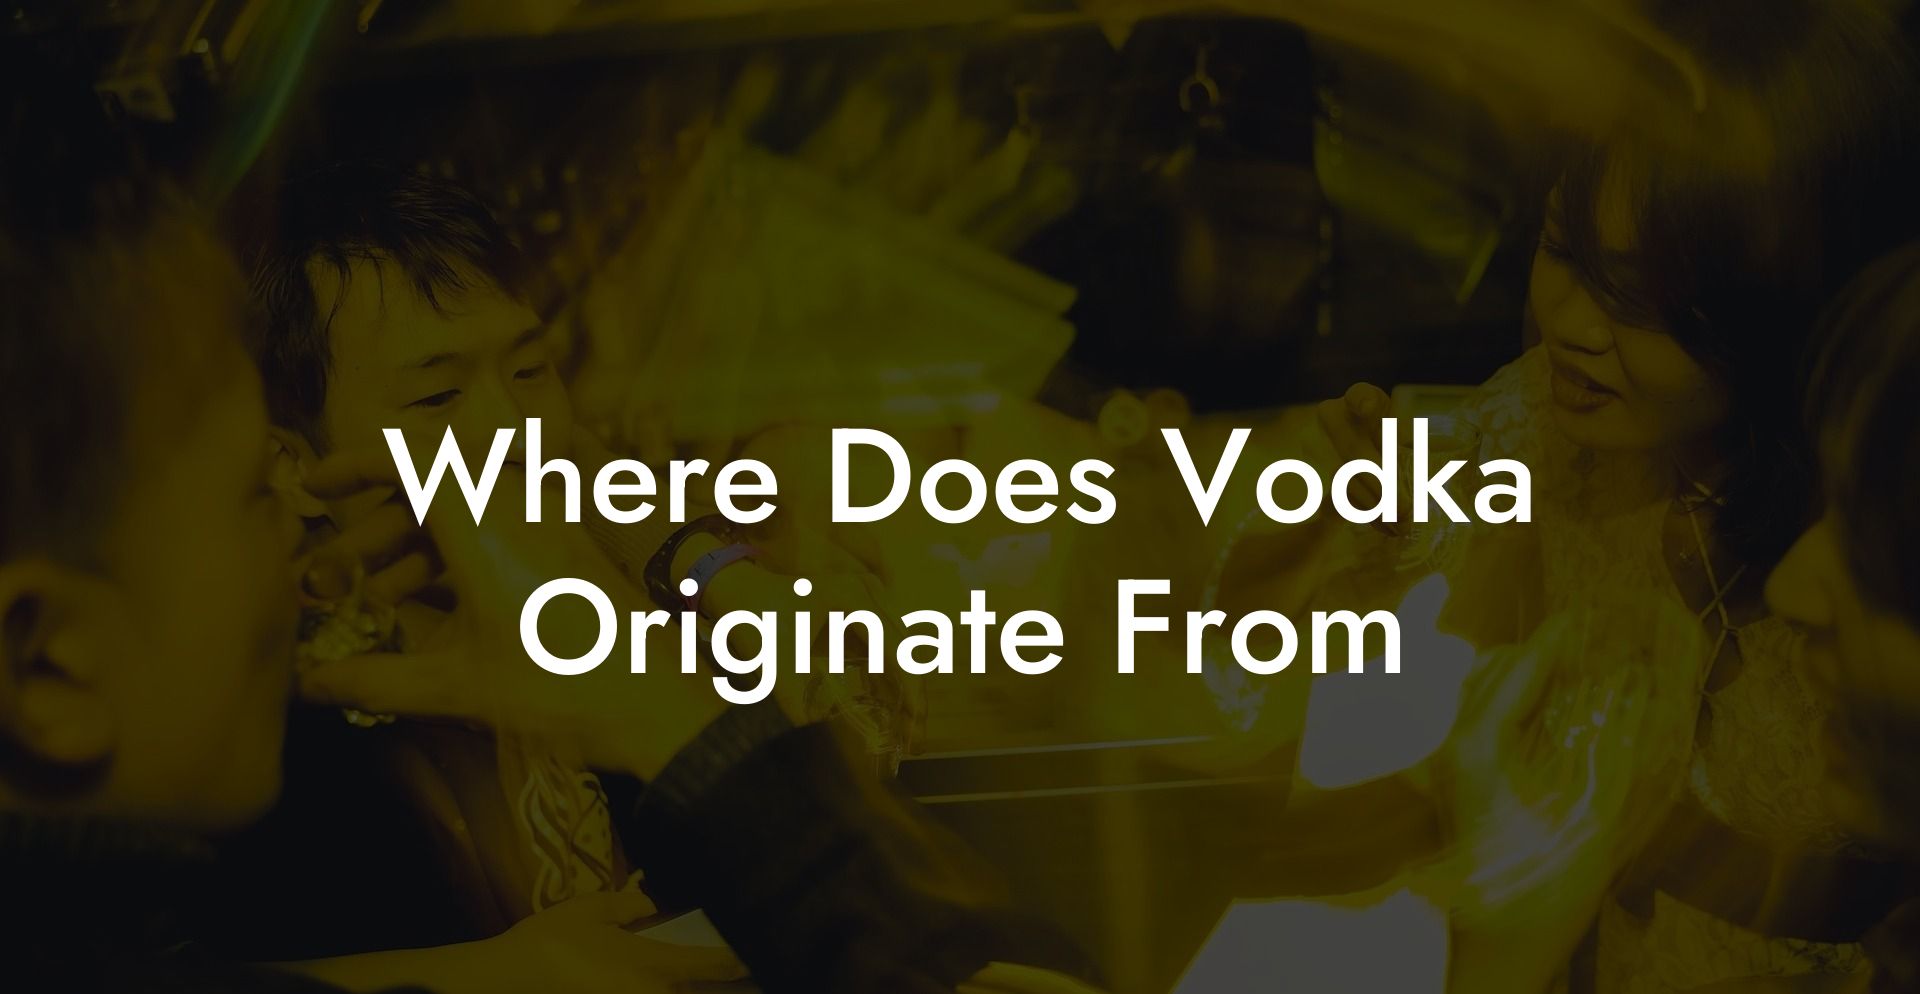 Where Does Vodka Originate From